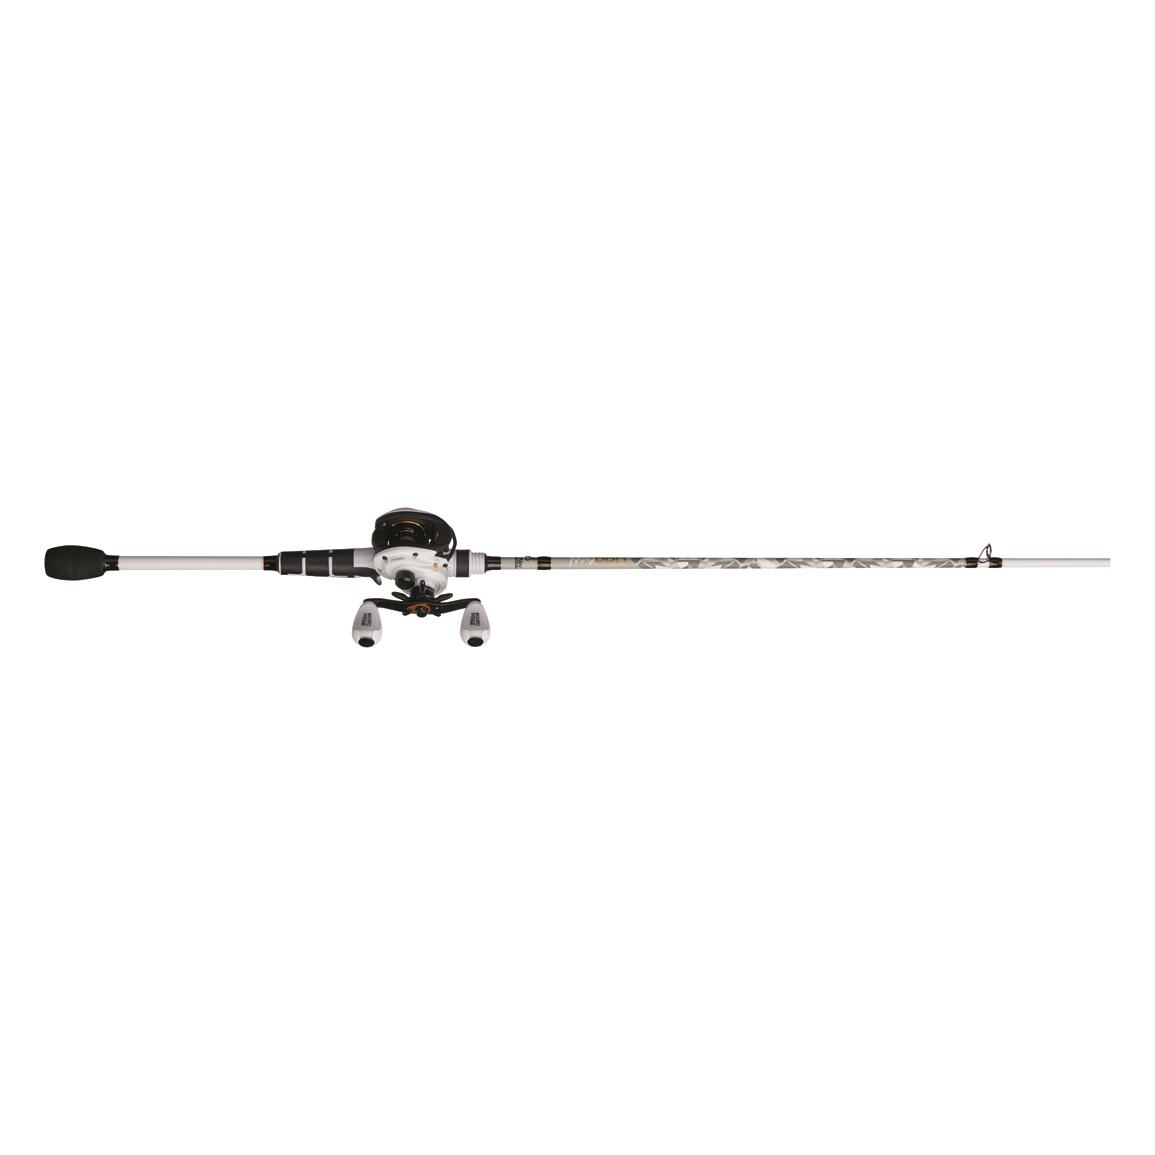 Abu Garcia Max Pro Baitcast Combo, 7' Length, Medium Heavy Power, Right  Handed - 726885, Casting Combos at Sportsman's Guide